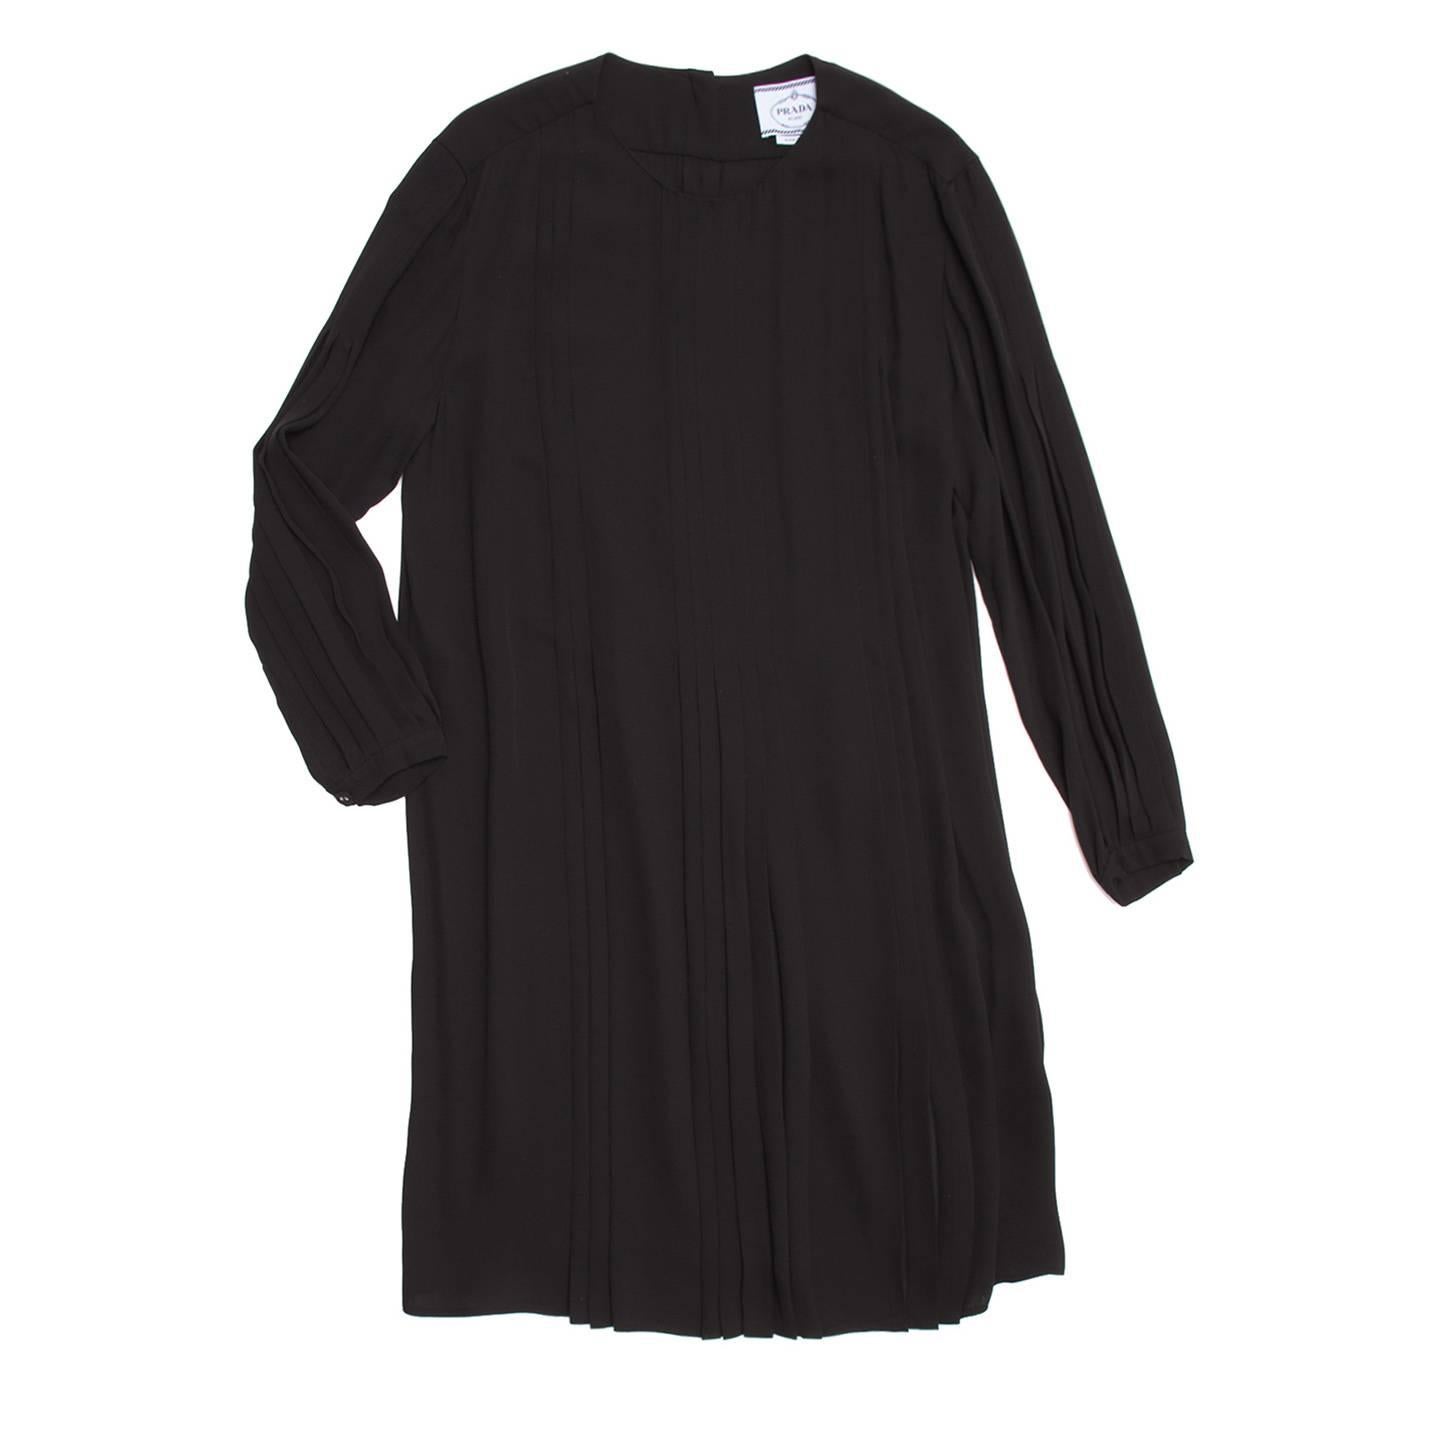 Lovely black long sleeve silk pleated baby doll dress with button down closure detailing down back.

Size  42 Italian sizing

Condition  Excellent: never worn